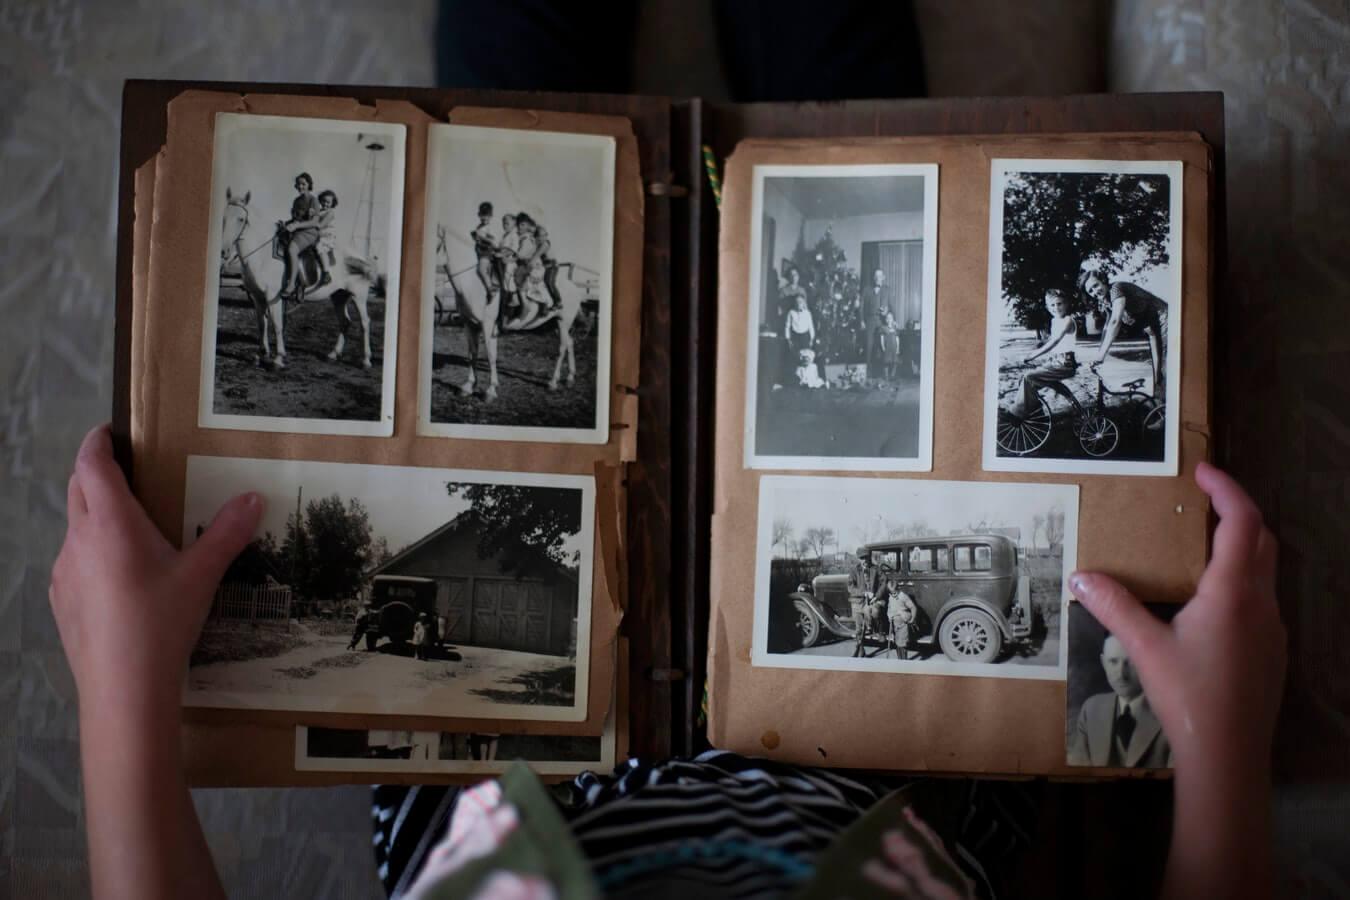 A pair of hands holds a very old photo album containing black-and-white family photos.